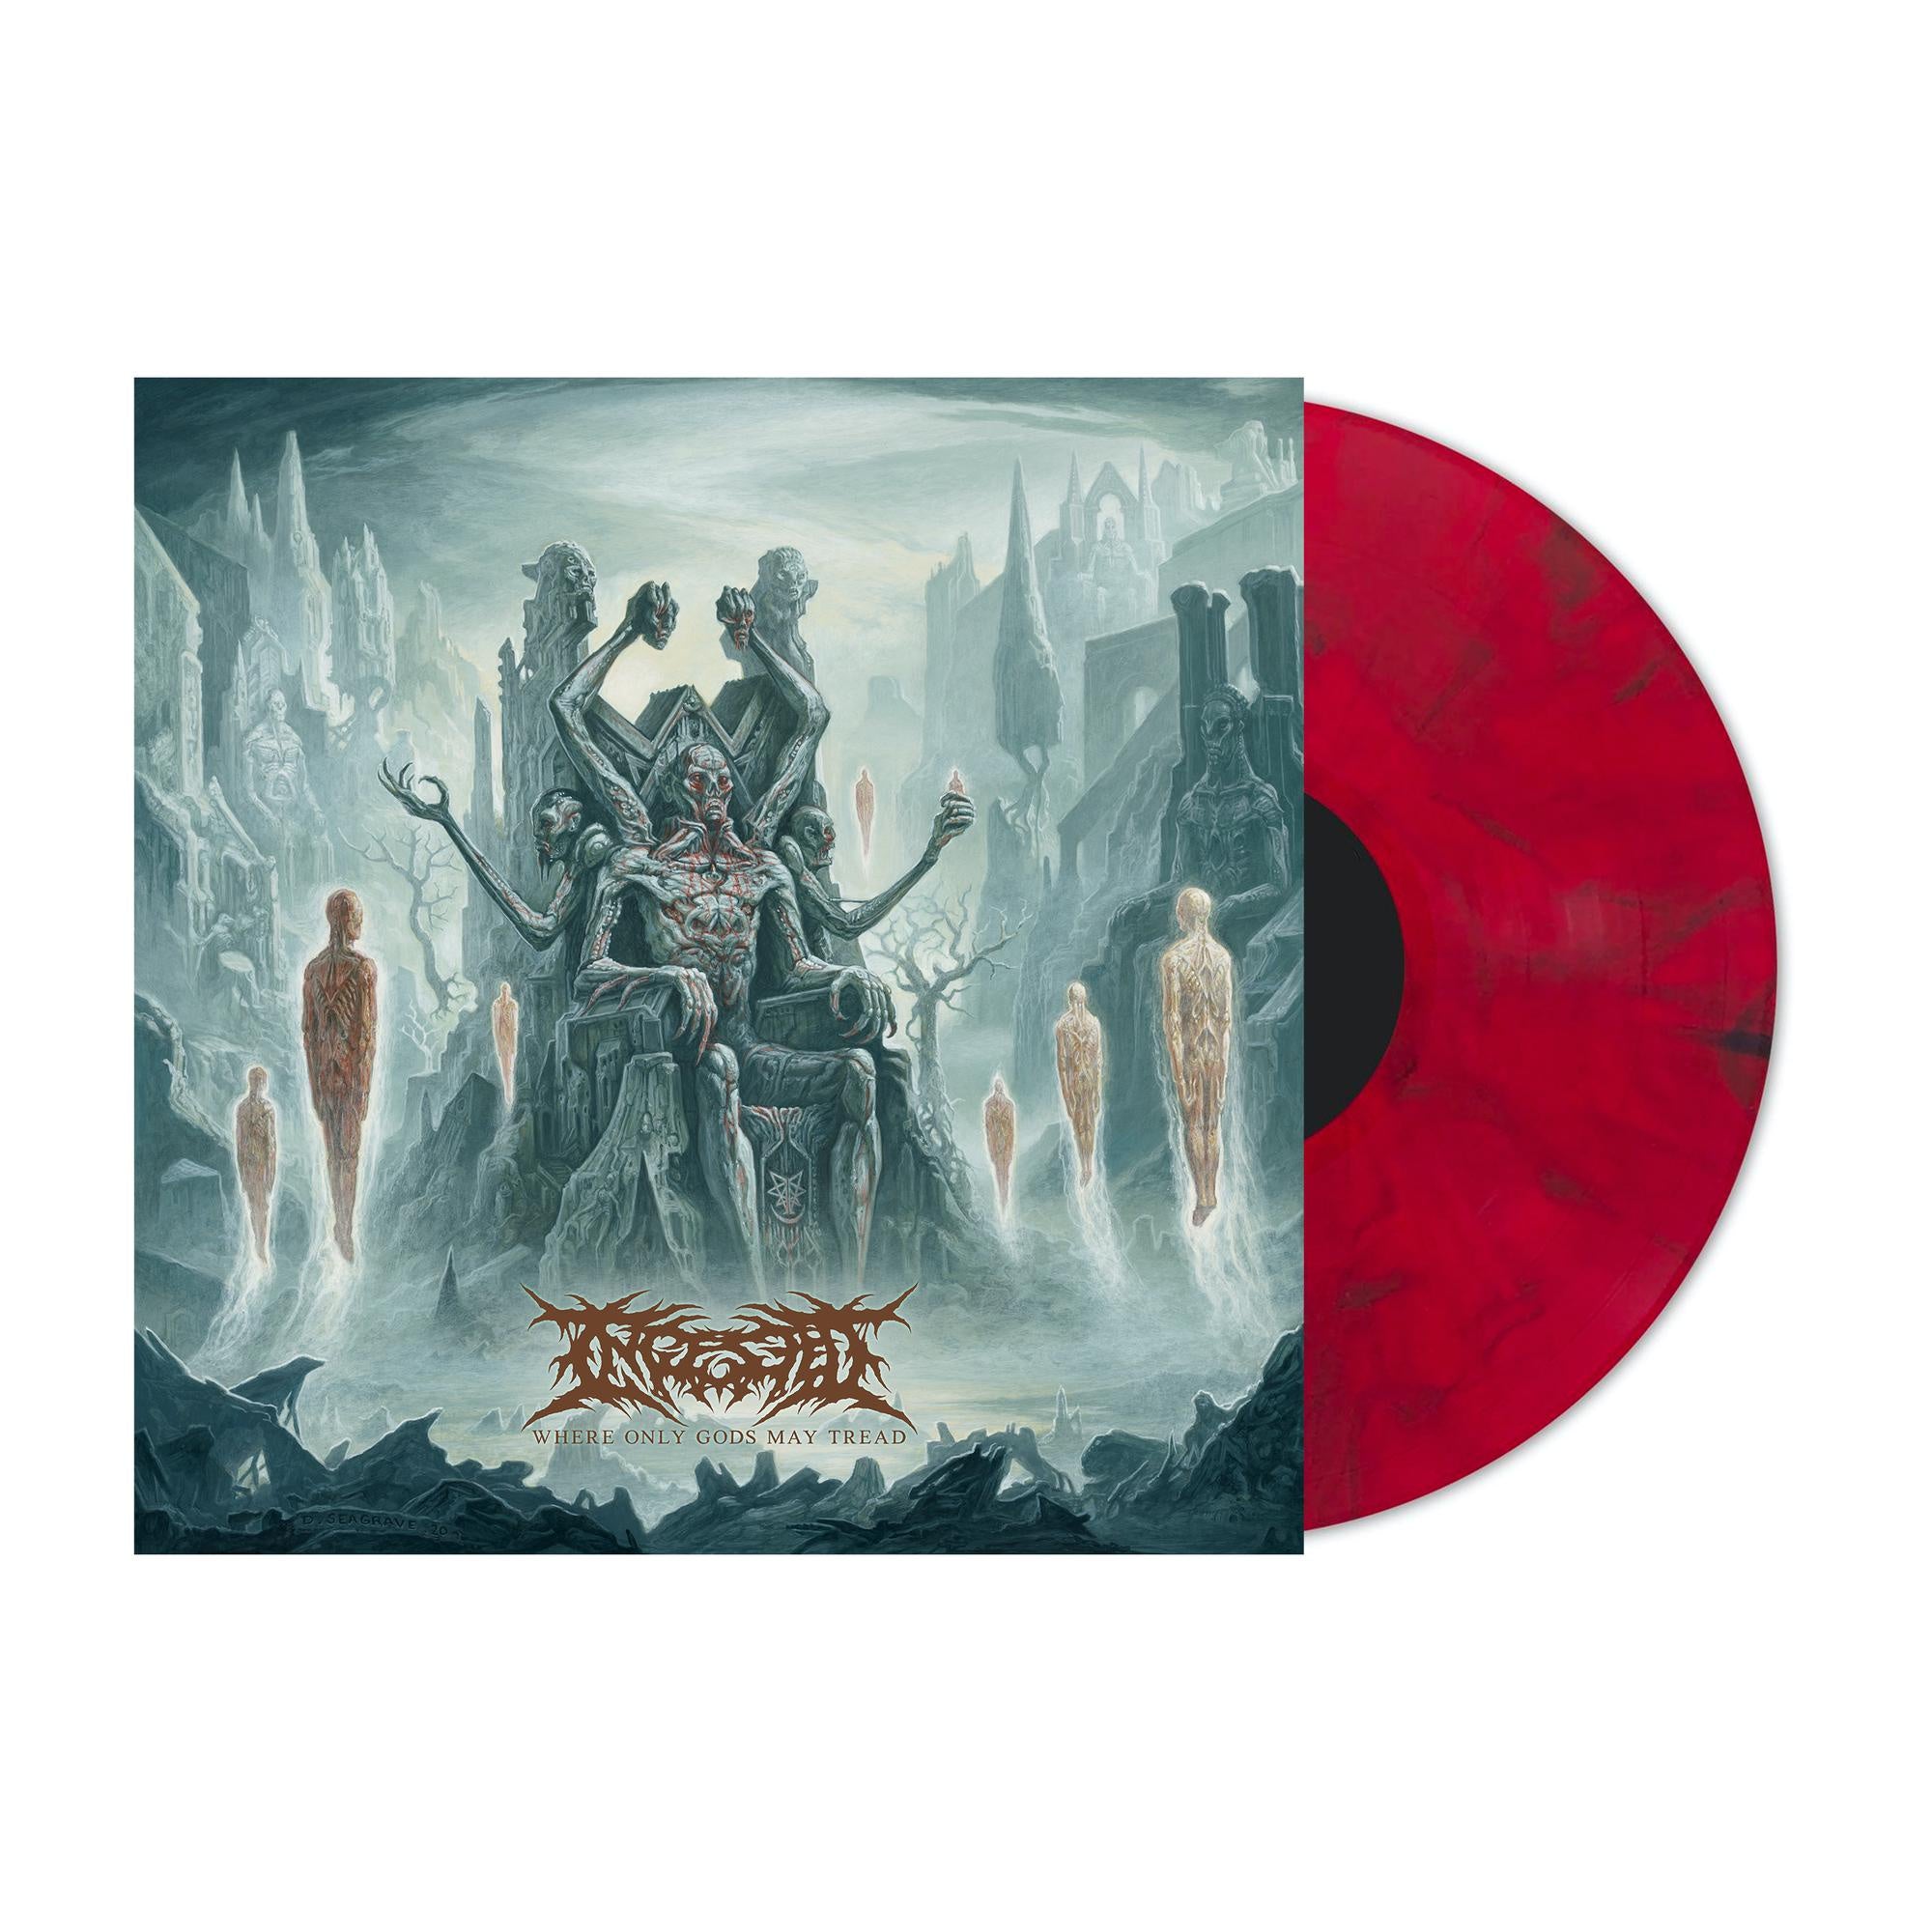 Ingested - Where Only Gods May Tread - New LP Record 2020 Unique Leader Red Colored Vinyl - Death Metal